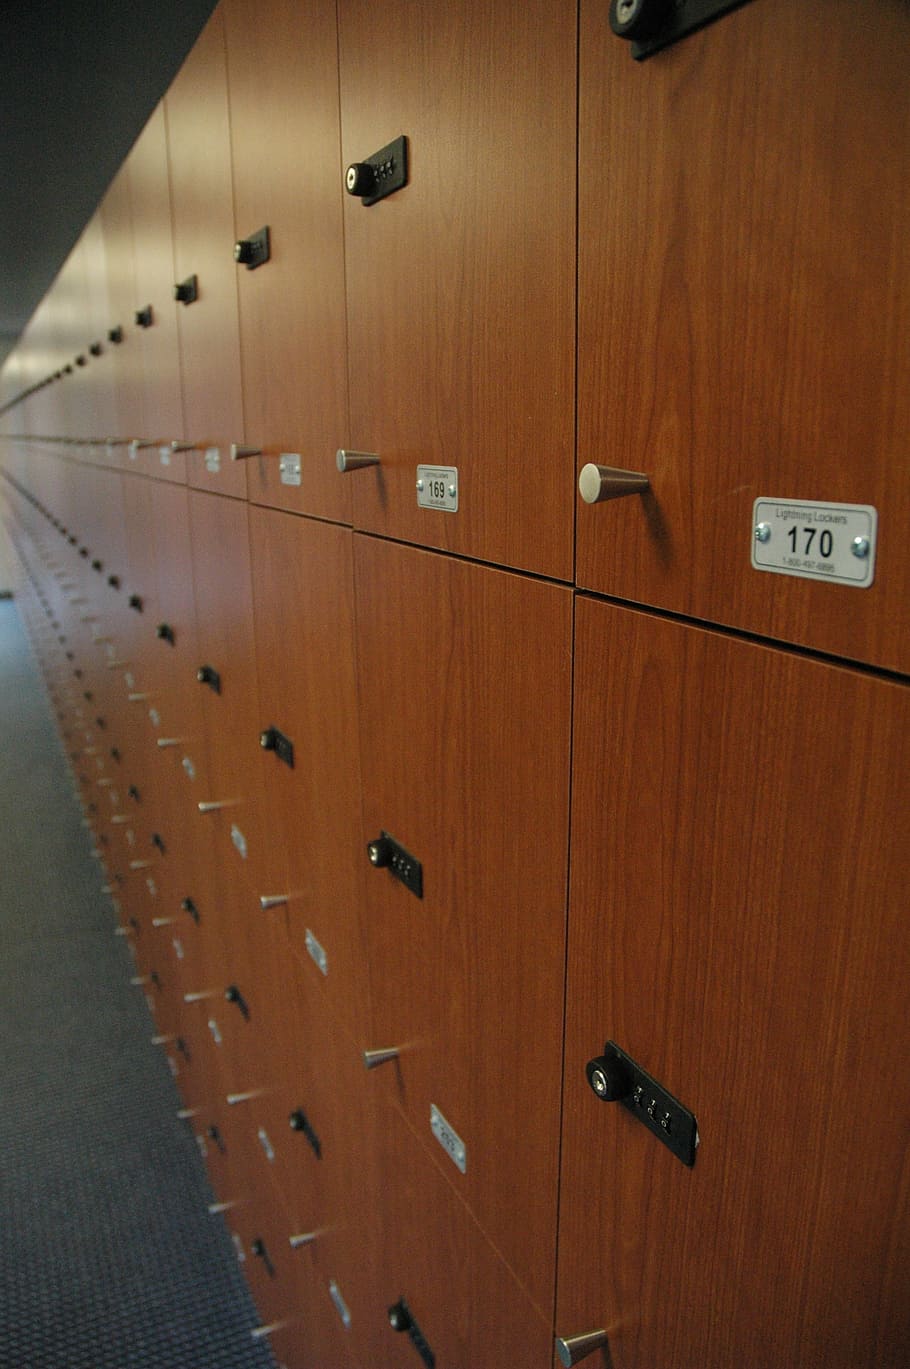 locker, stadium, wood, indoors, safety, security, dressing room, protection, closed, repetition